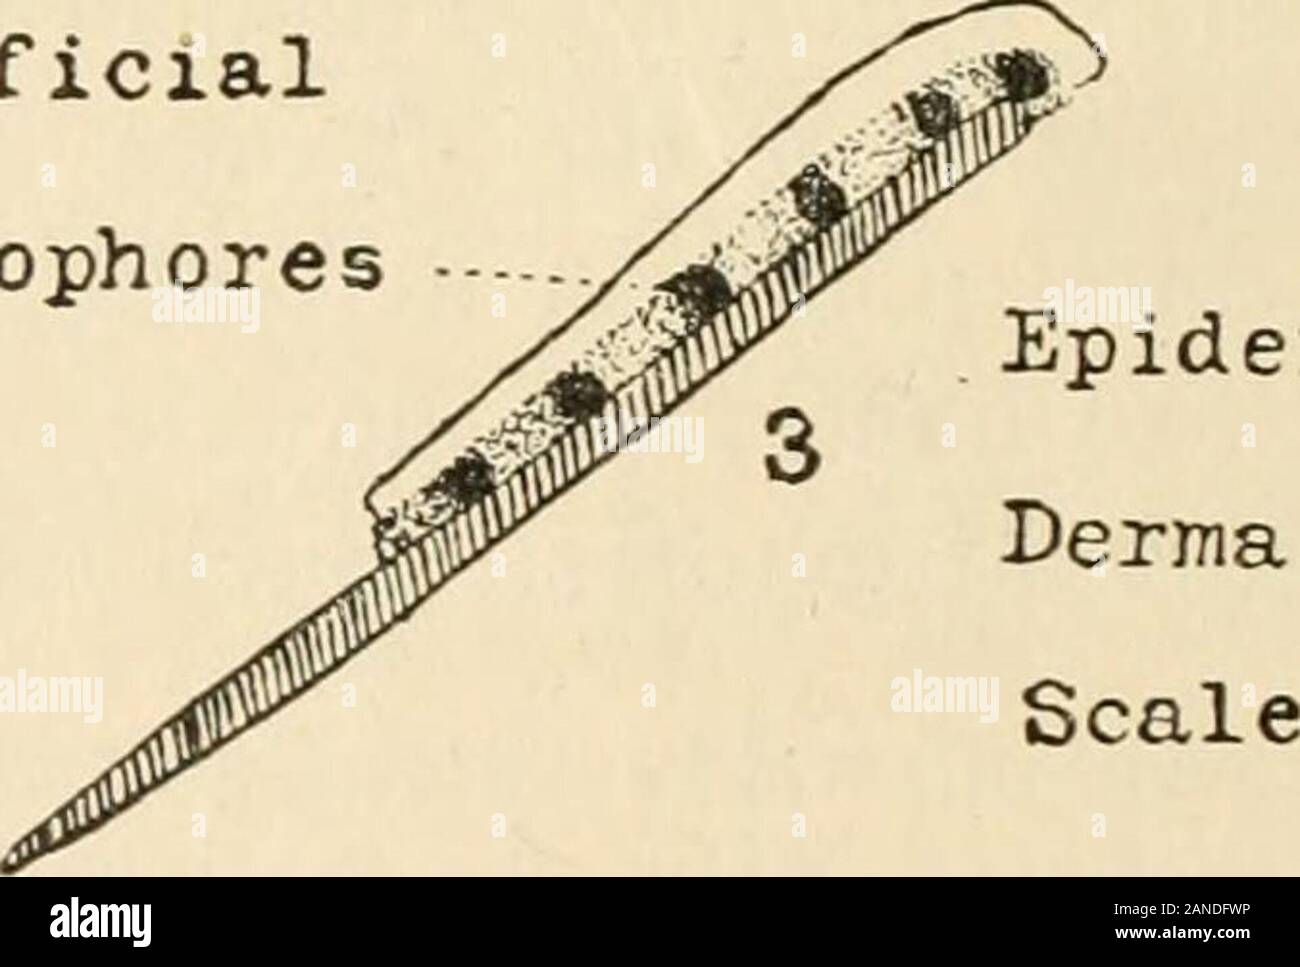 The Journal of experimental zoology . SuperficialMelanophores. Epidermis ? Fig. A Diagrams of the scales in Fundulus. 1, position of the scales in across-section of the skin; 2, single scale held by forceps; 3, side view of isolatedscale. The scales are so arranged that it is possible by inserting abroad scalpel at the point x, to raise the scale, 1, with its super-ficial layer of chromatophores and epidermis, without injuringor disturbing them in any way. The deeper melanophores(shown as stellate bodies in the figure) remain behind in the proc- PHYSIOLOGY OF CHROMATOPHORES OF FISHES 531 ess, Stock Photo